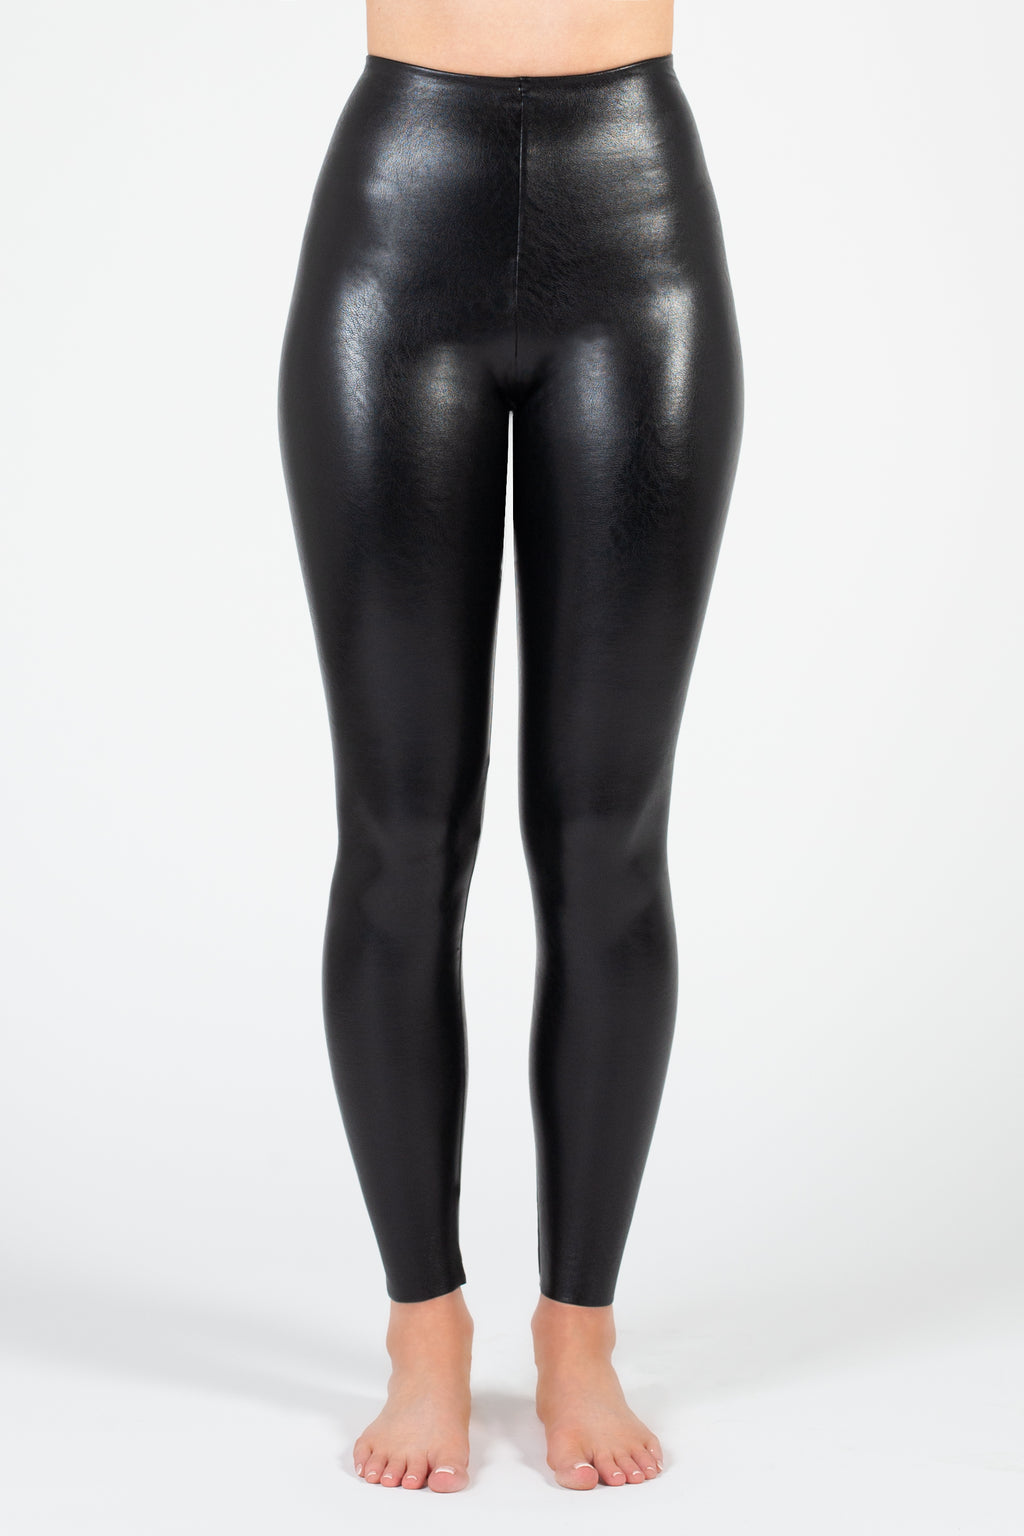 NEW Commando Control Top Faux Patent Leather Leggings In Black Sz M #1292 -  Helia Beer Co